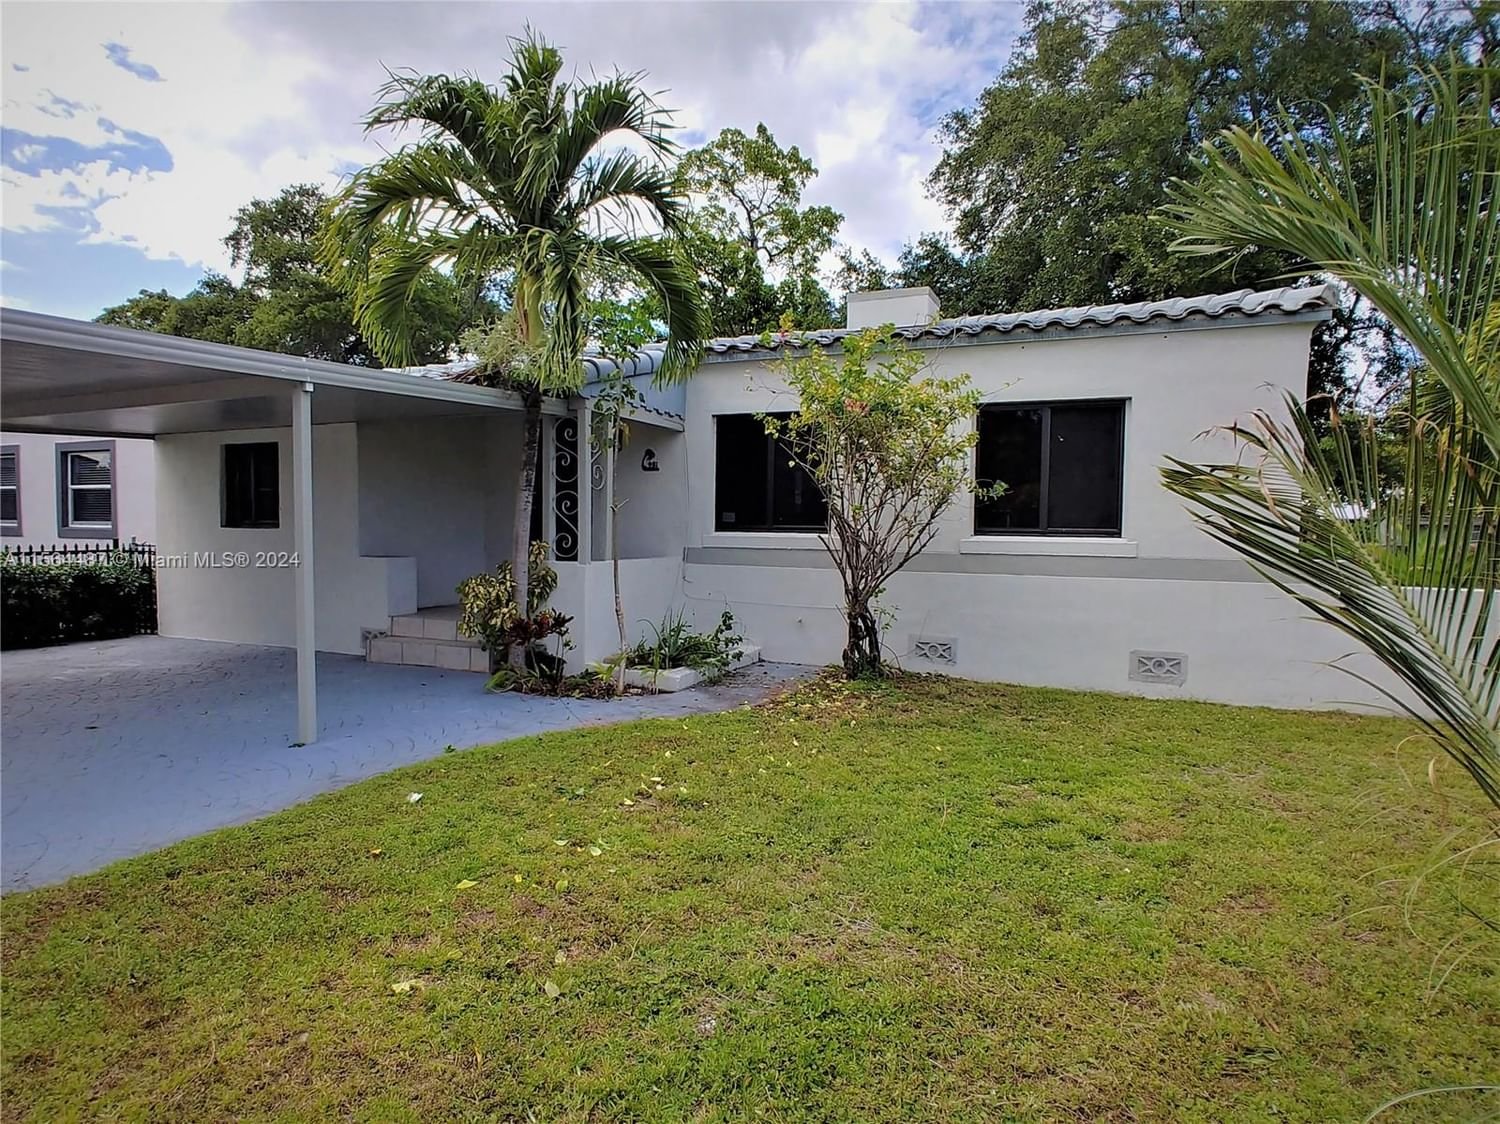 Real estate property located at 251 NW 45 ST, Miami-Dade County, COLUMBIA PARK CORRECTED P, Miami, FL